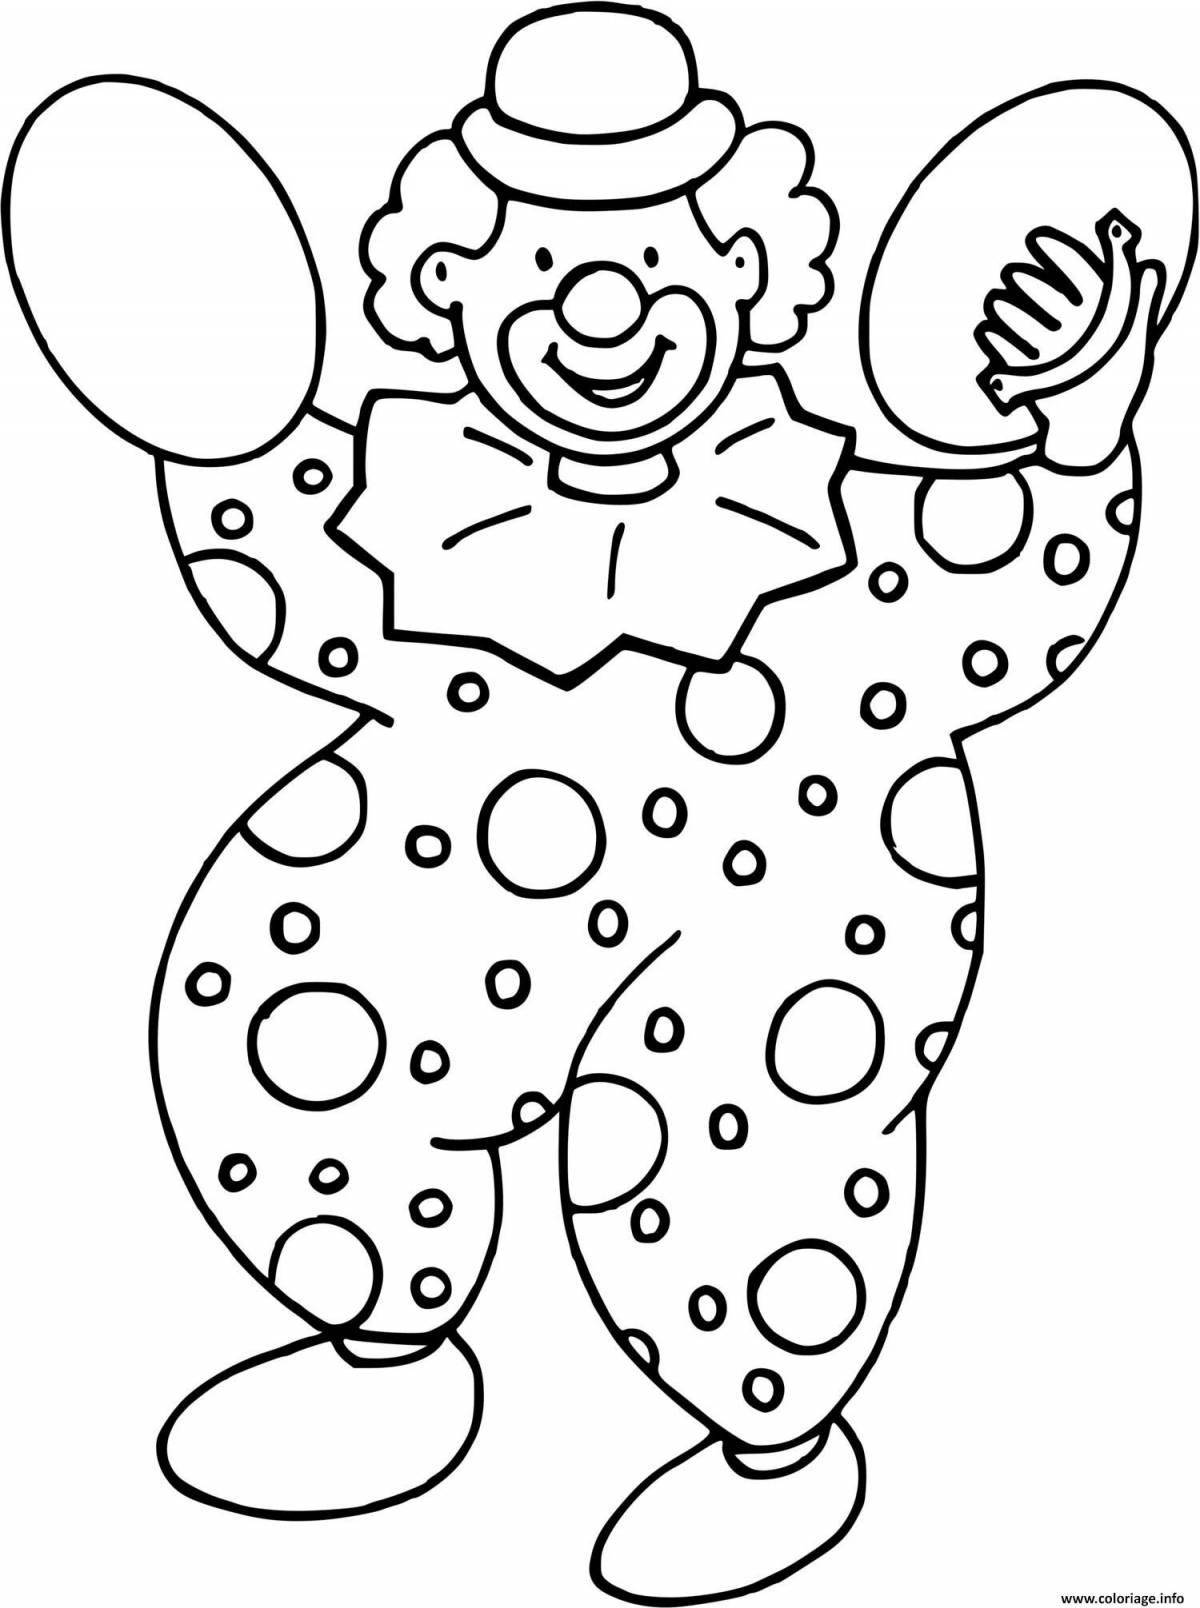 Shining clown coloring pages for kids